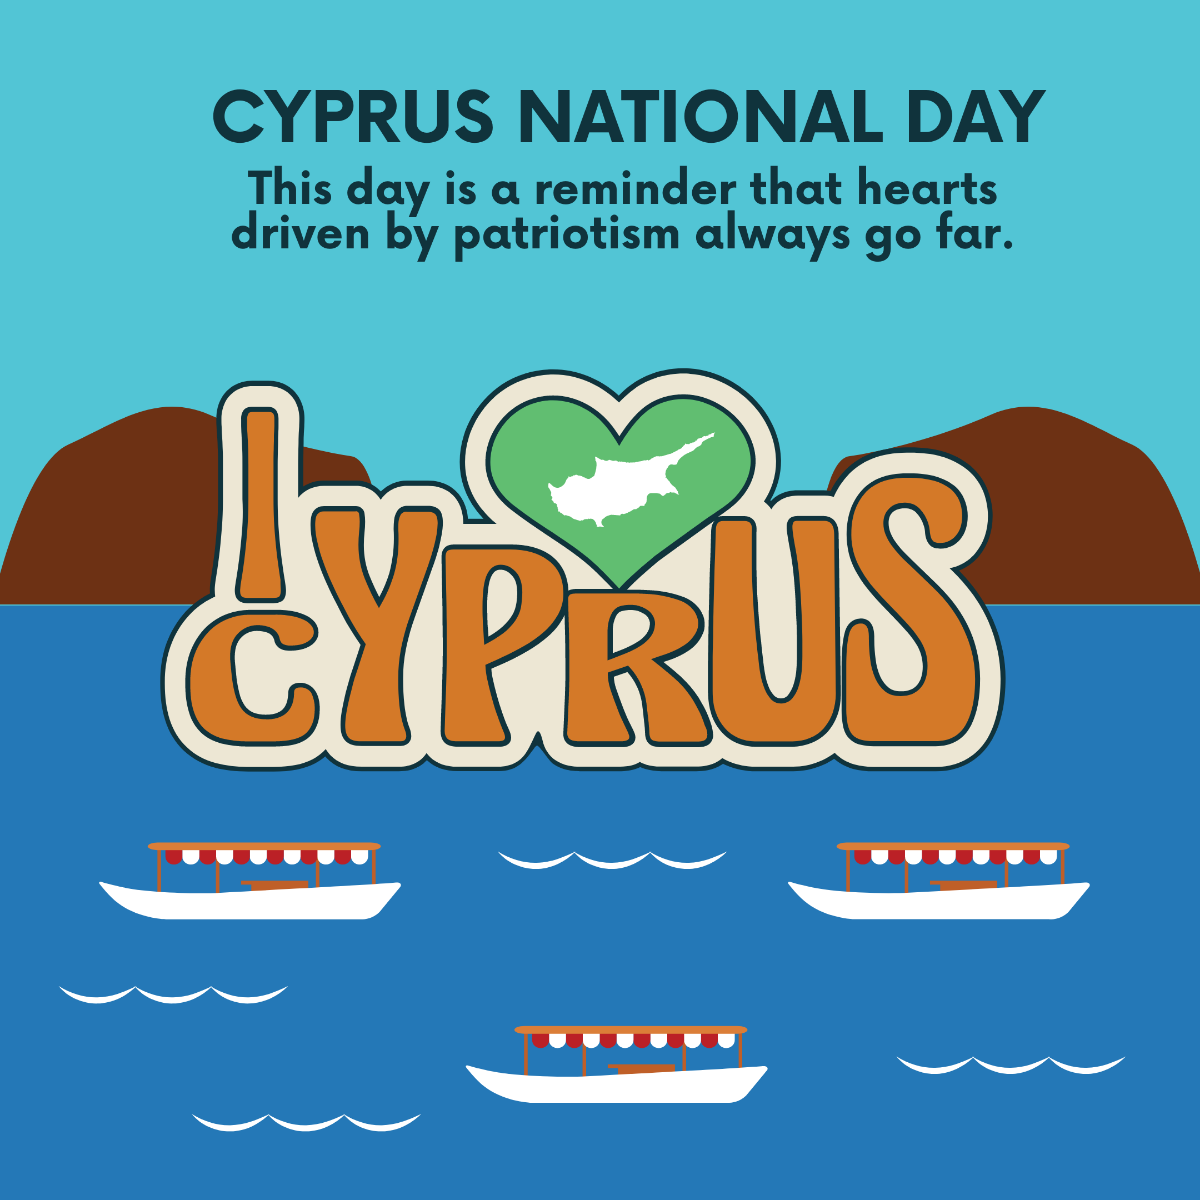 Free Cyprus National Day Instagram Post Template